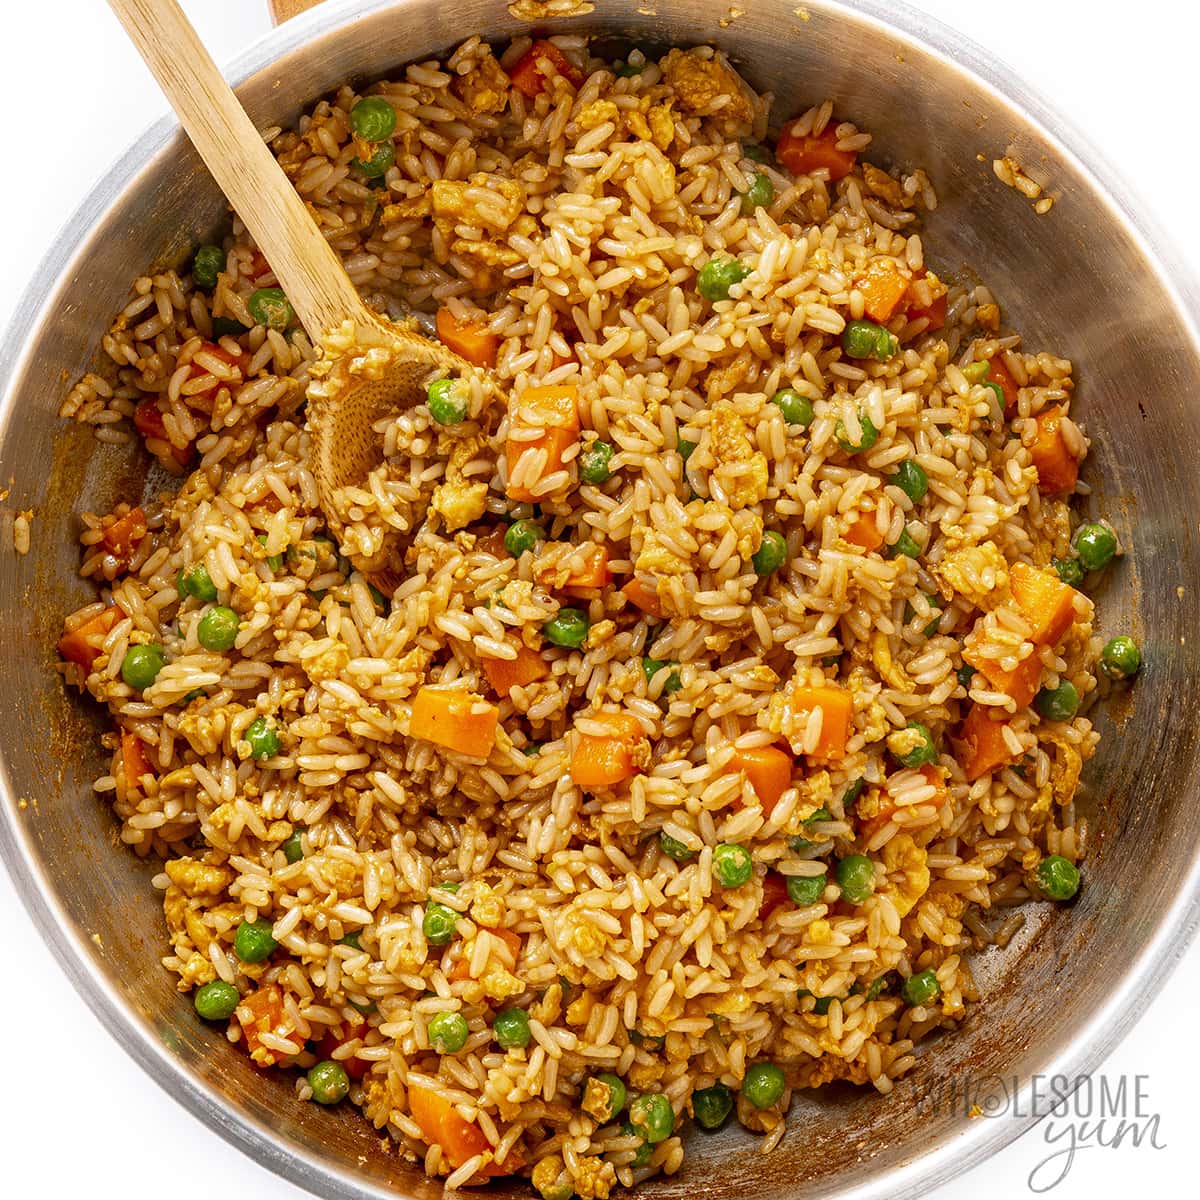 Cooked vegetable fried rice.